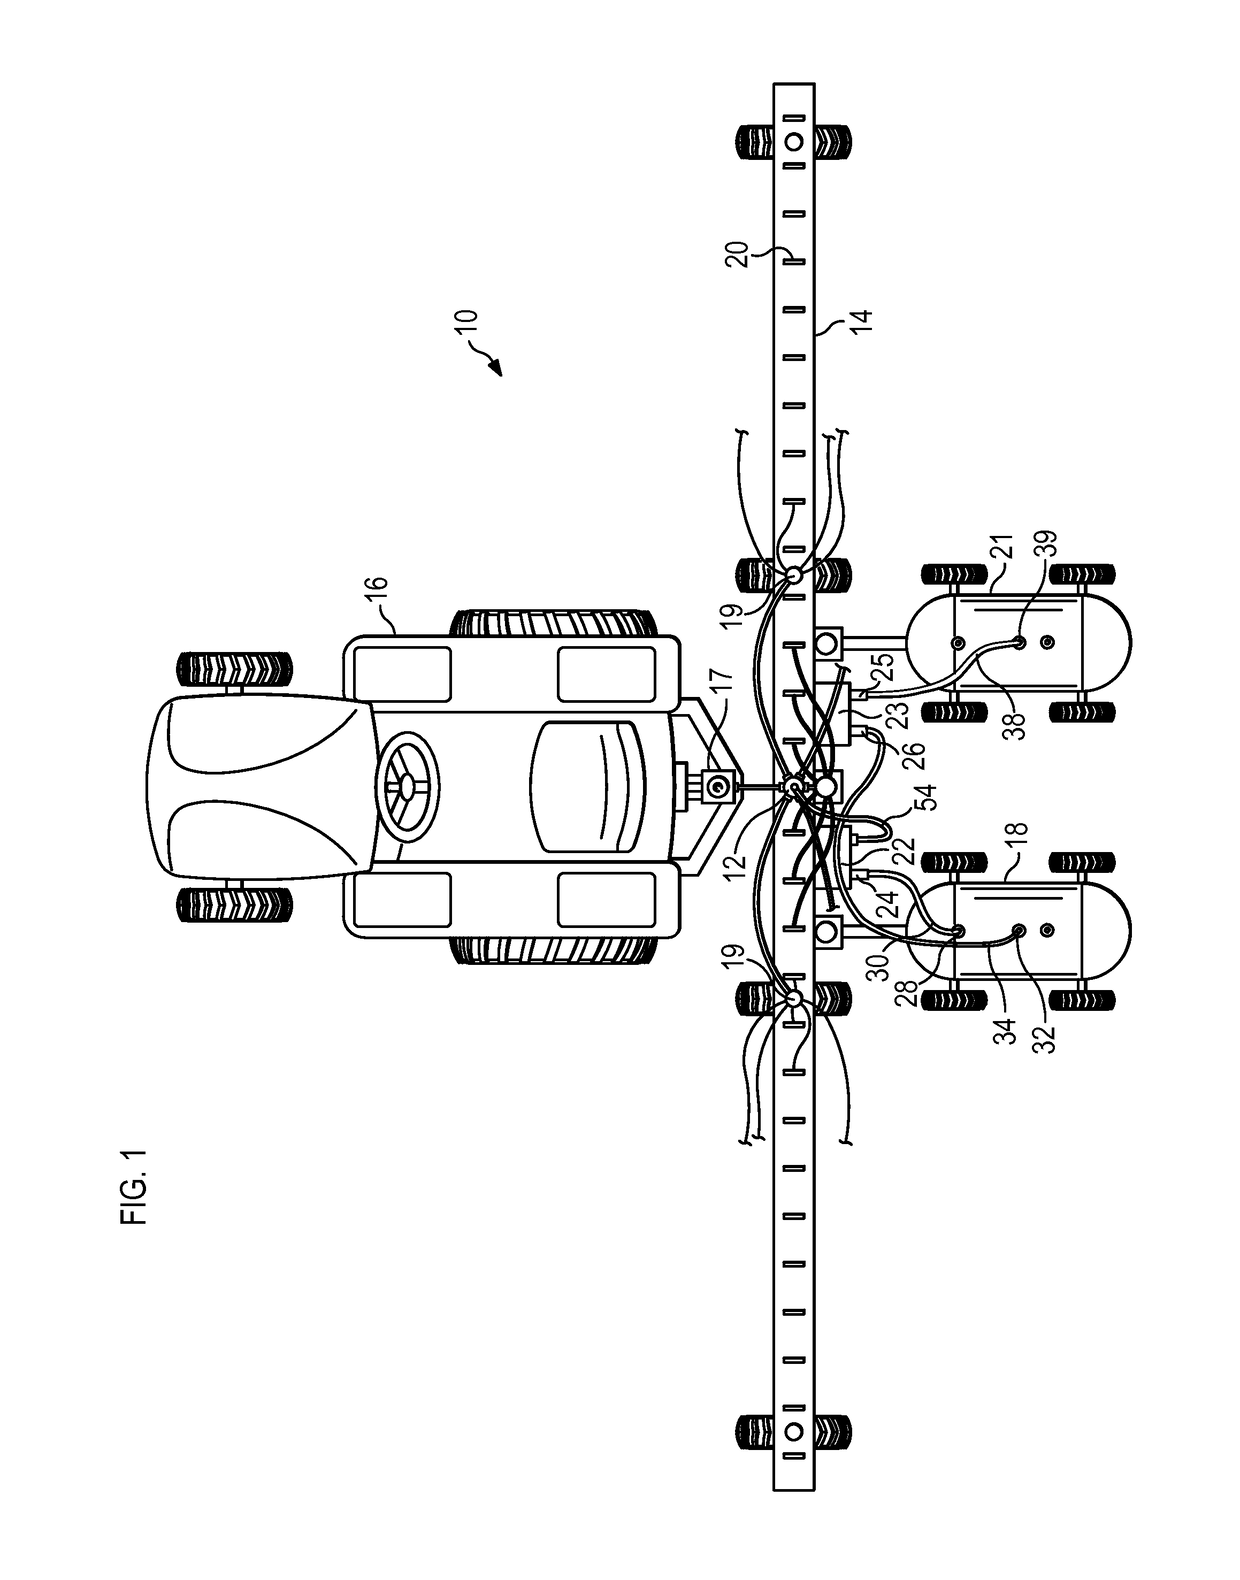 Anhydrous ammonia vapor charge unit for an applicator tank